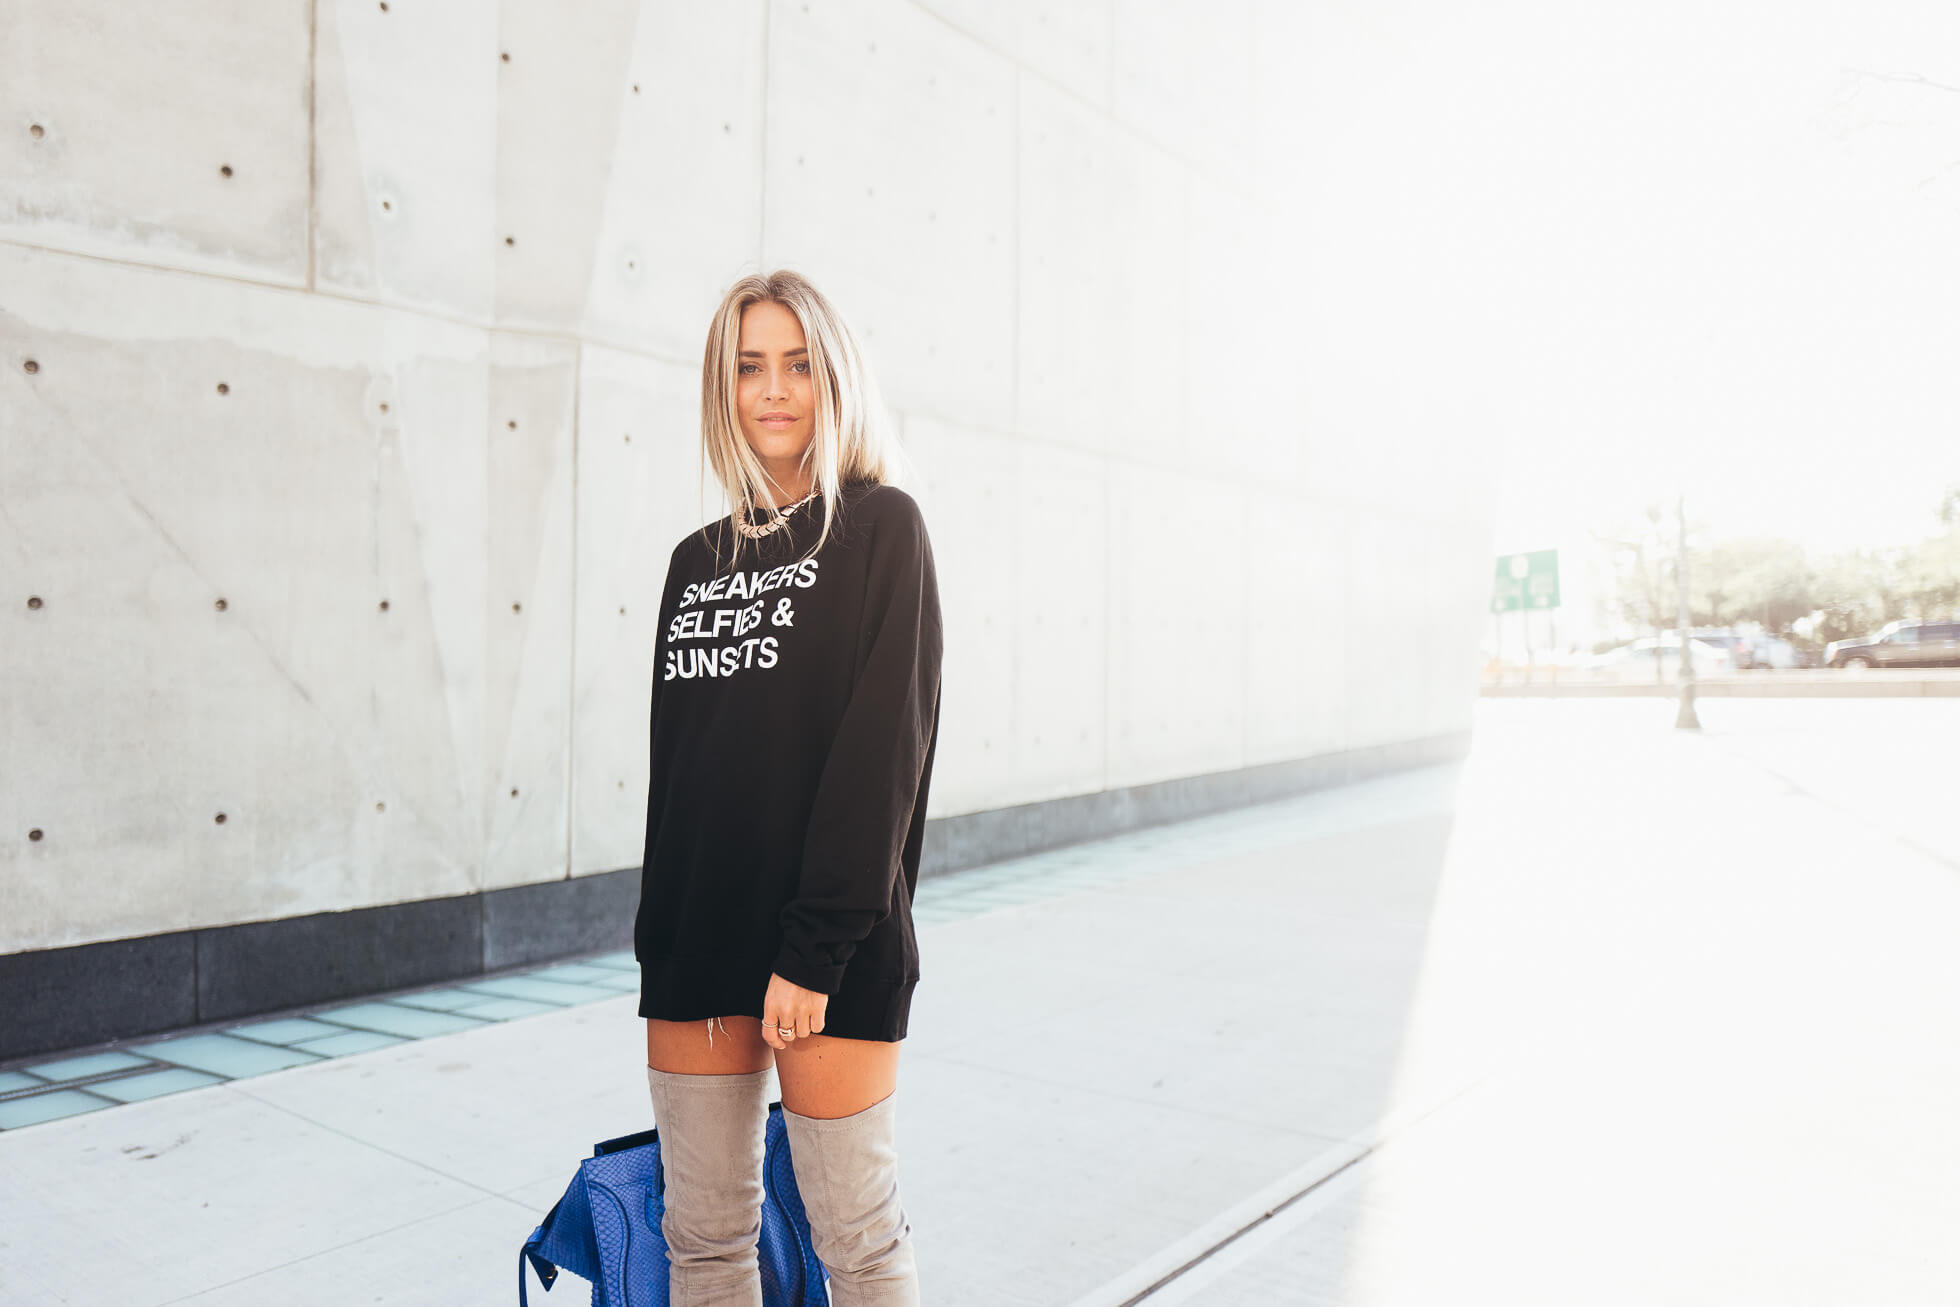 janni-deler-sneakers-selfies-sunsets-sweaterL1090925